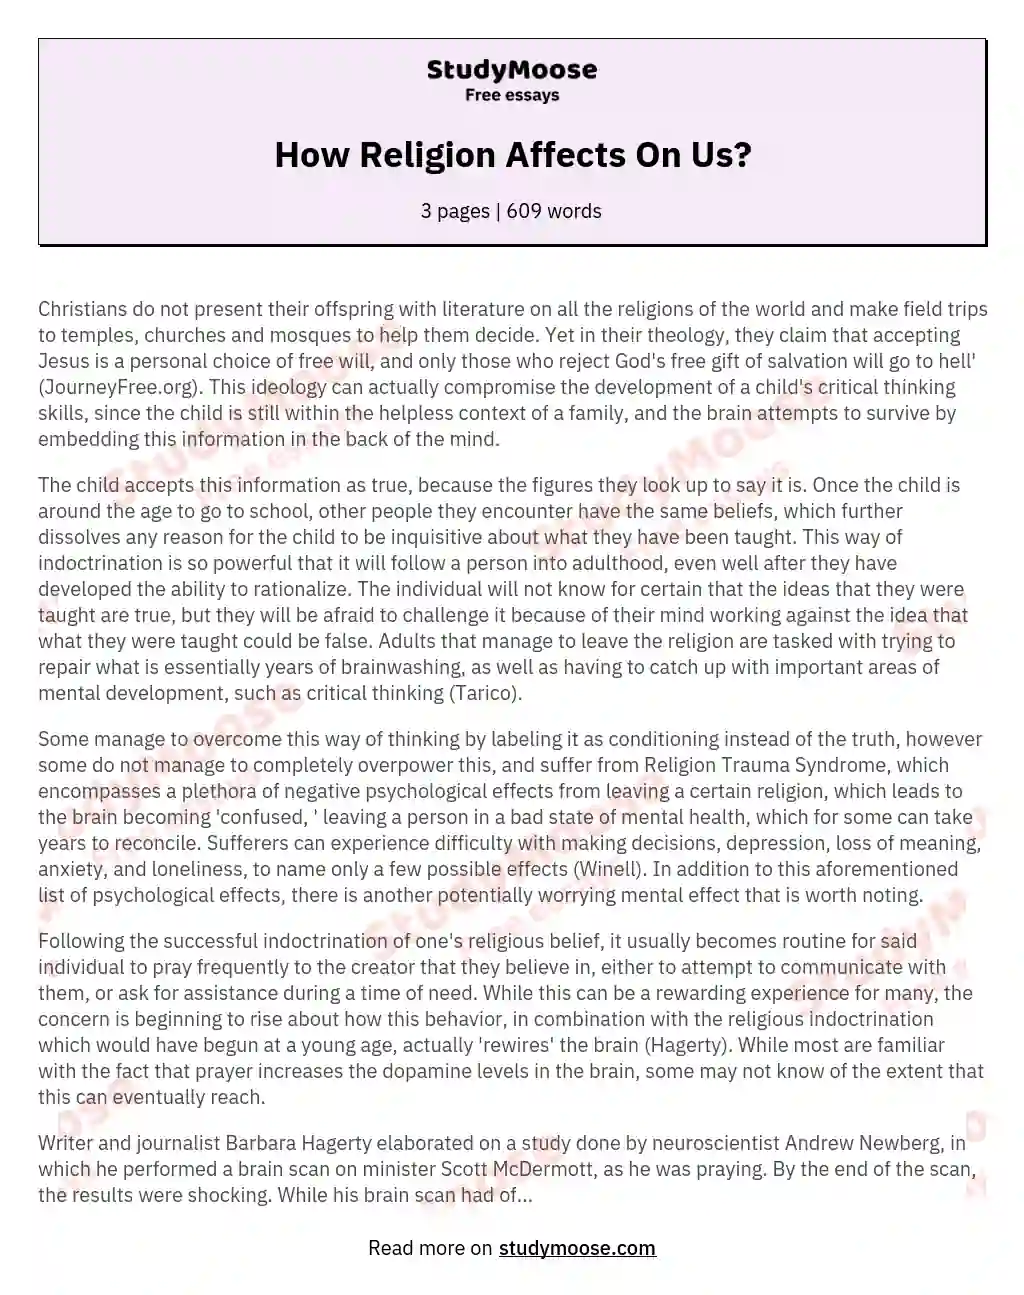 How Religion Affects On Us? essay